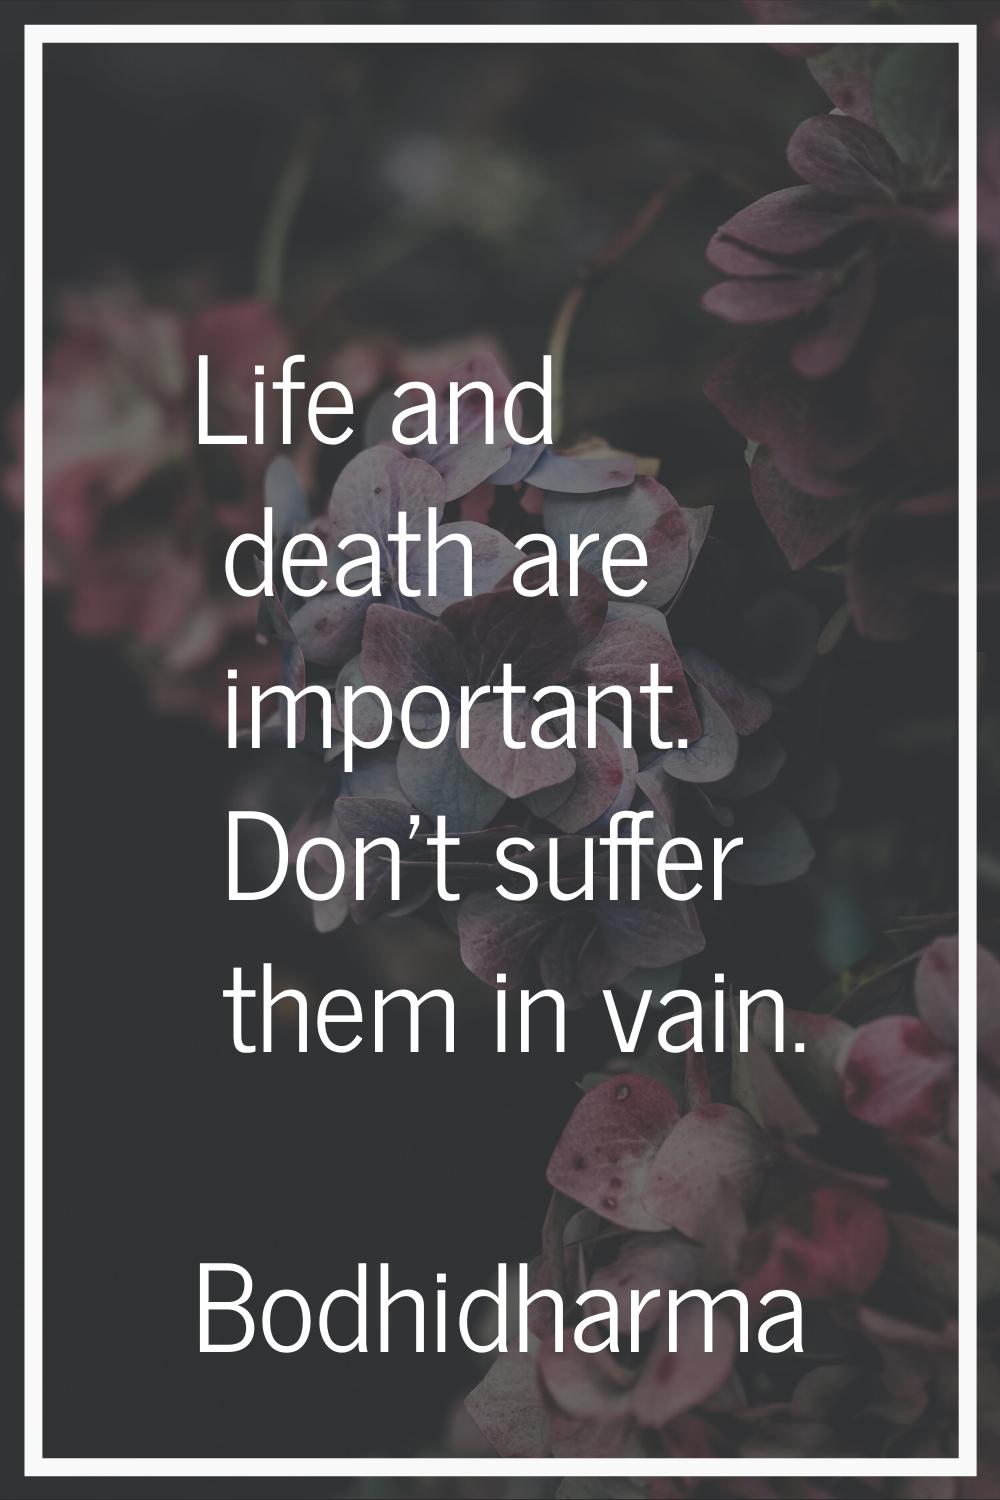 Life and death are important. Don't suffer them in vain.